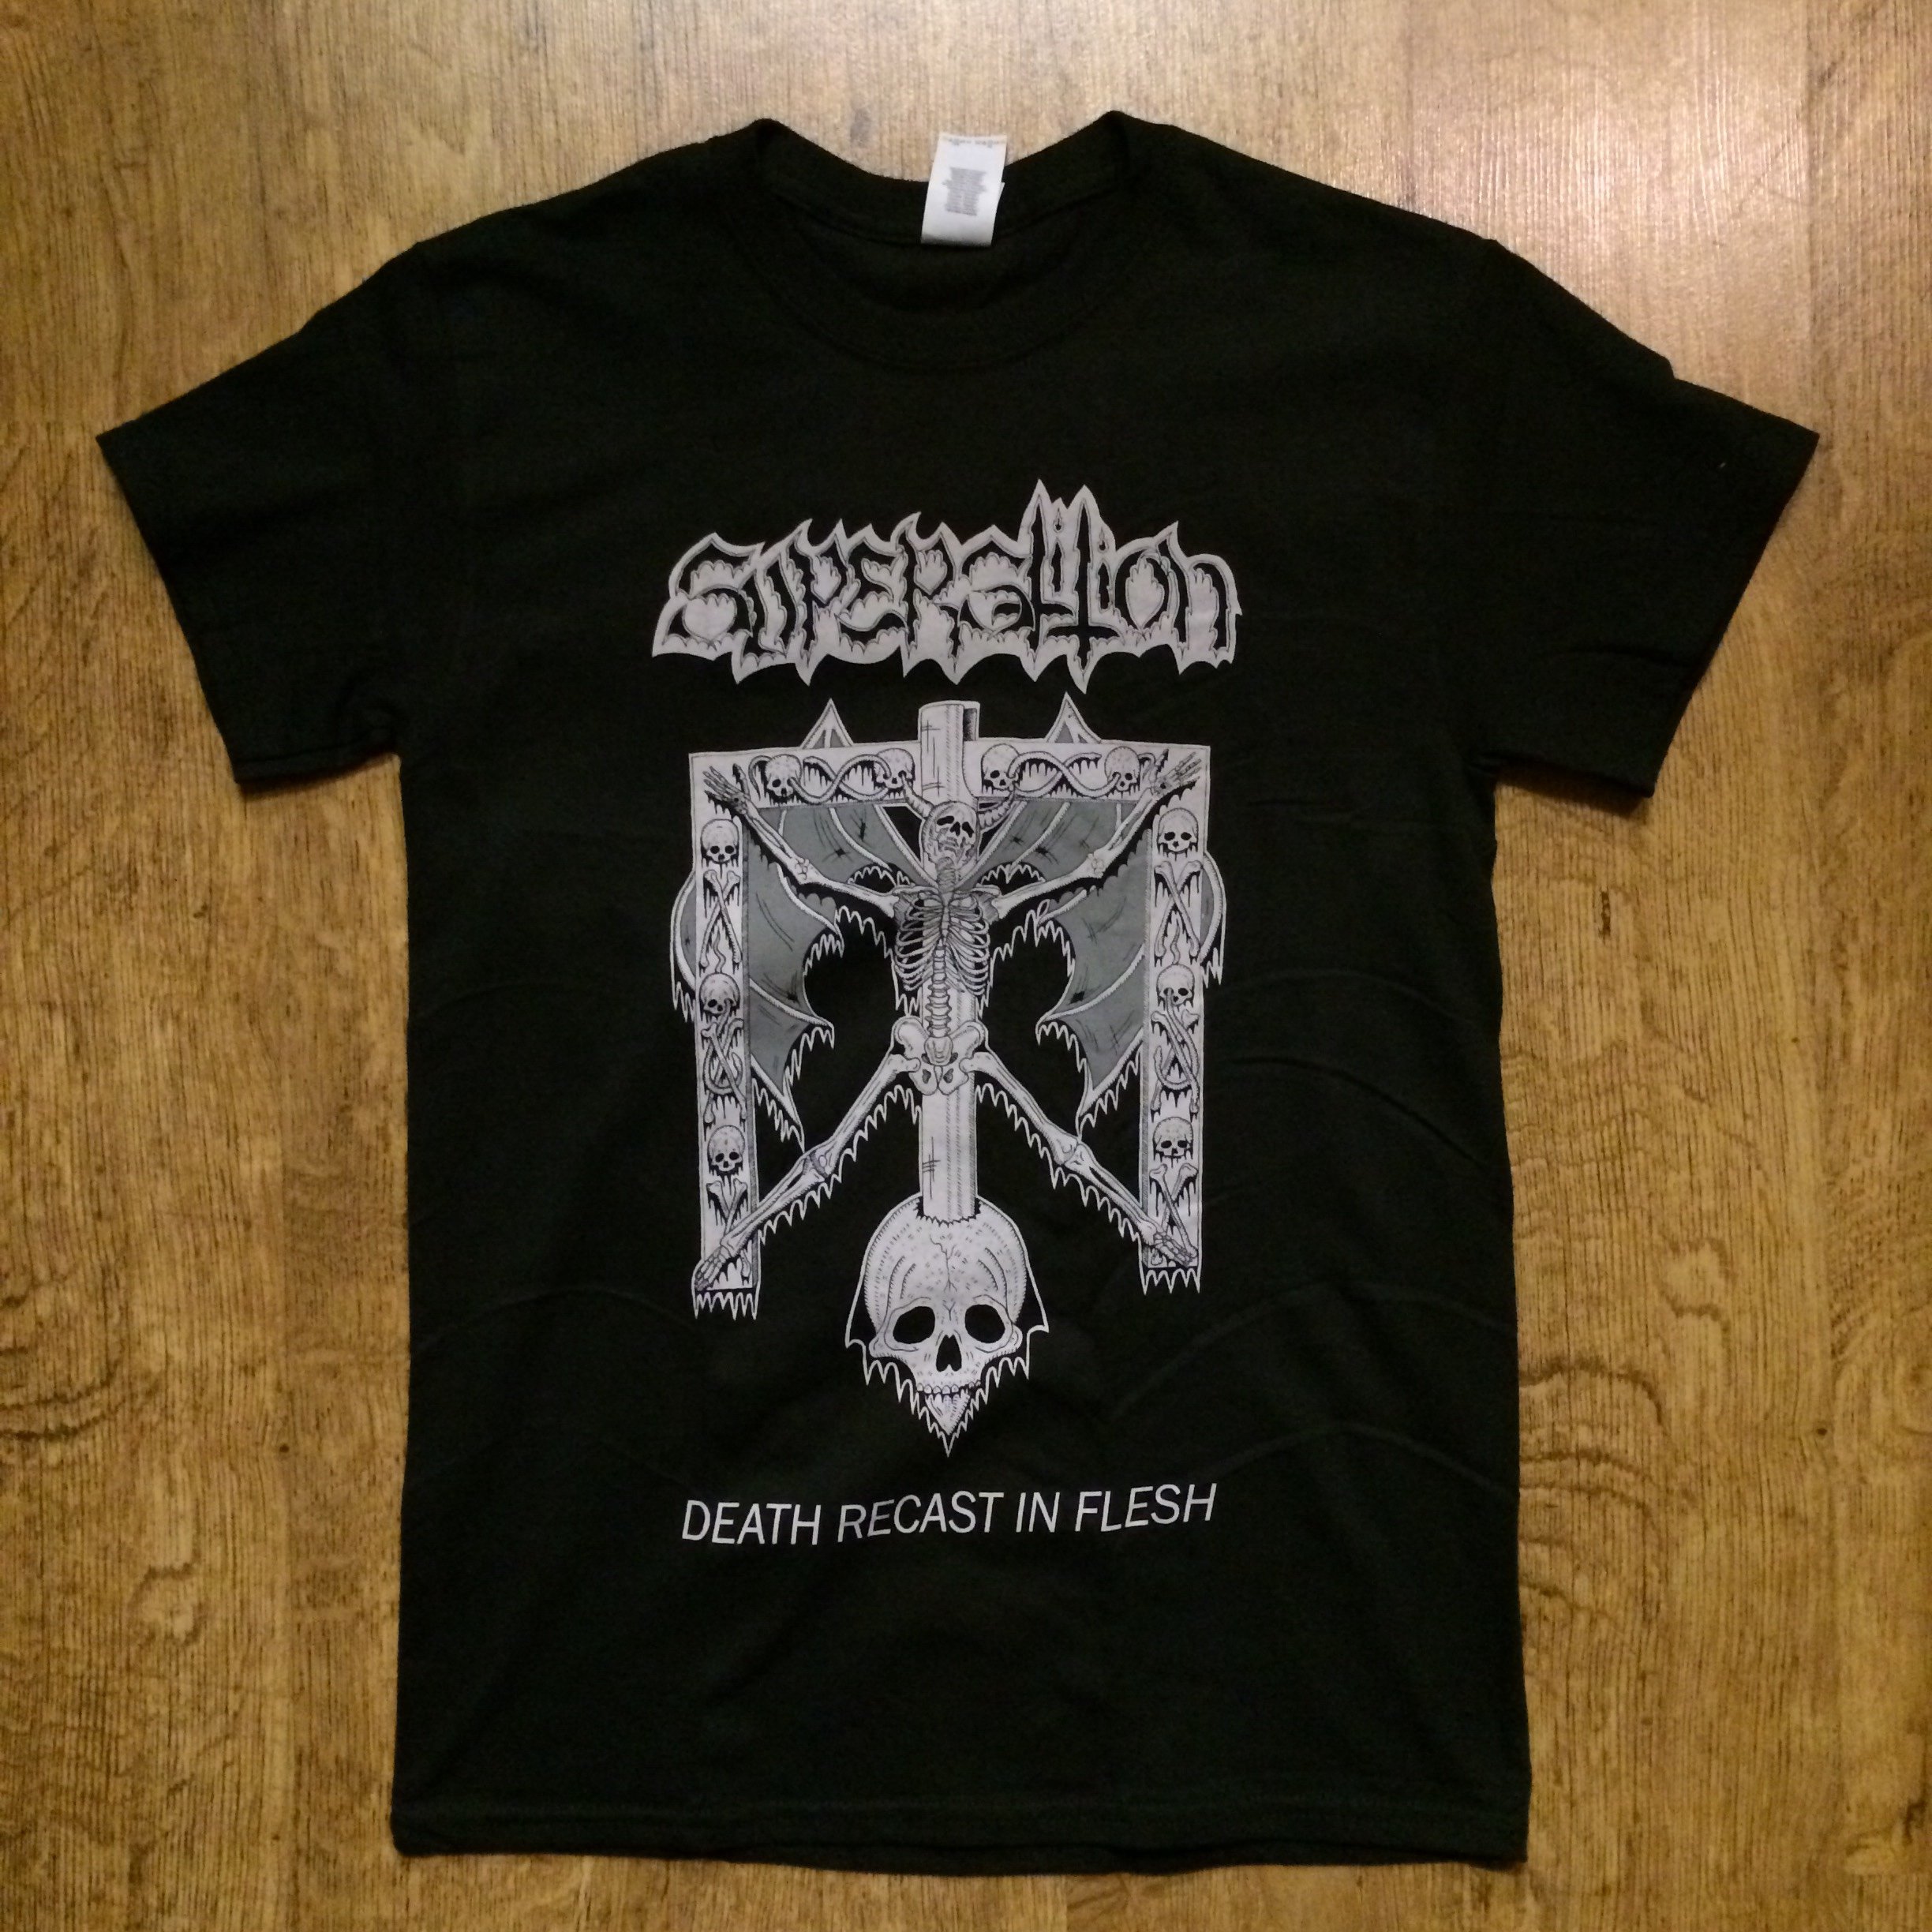 Photo of the Superstition - "Death Recast in Flesh" T-shirt (Black)